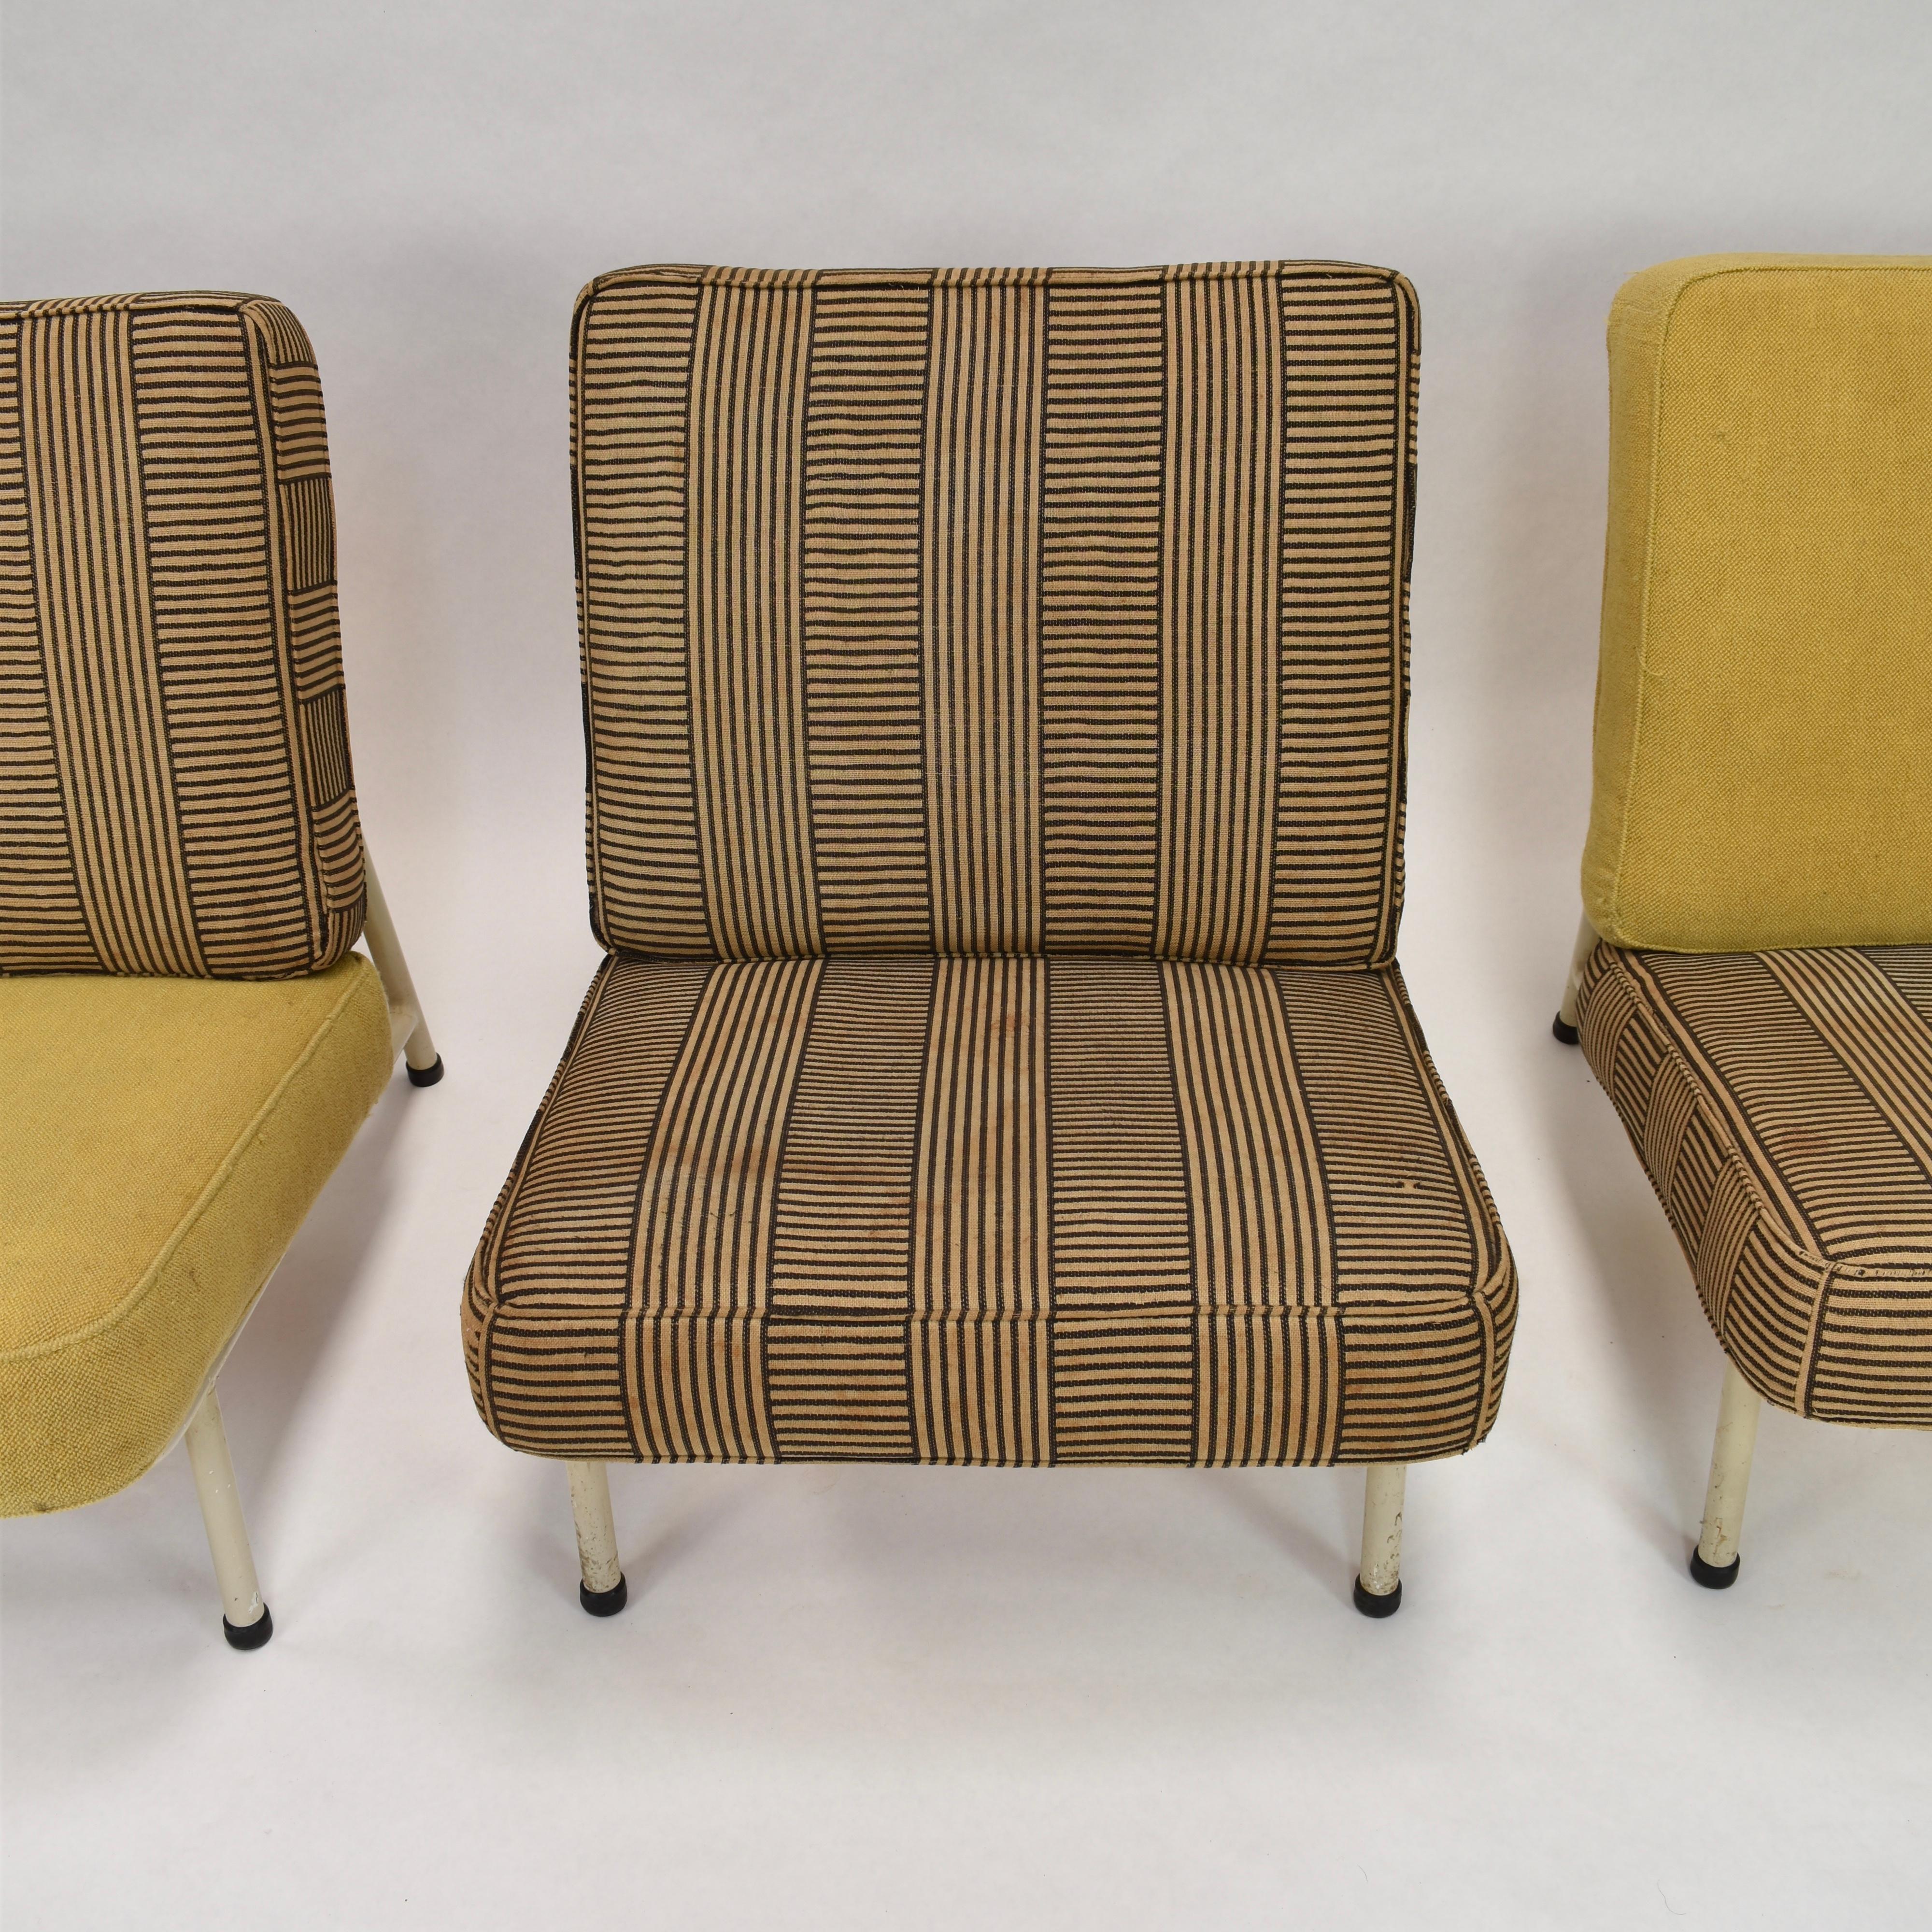 Set of Three Alf Svensson Lounge Chairs for DUX, Sweden, circa 1950 1